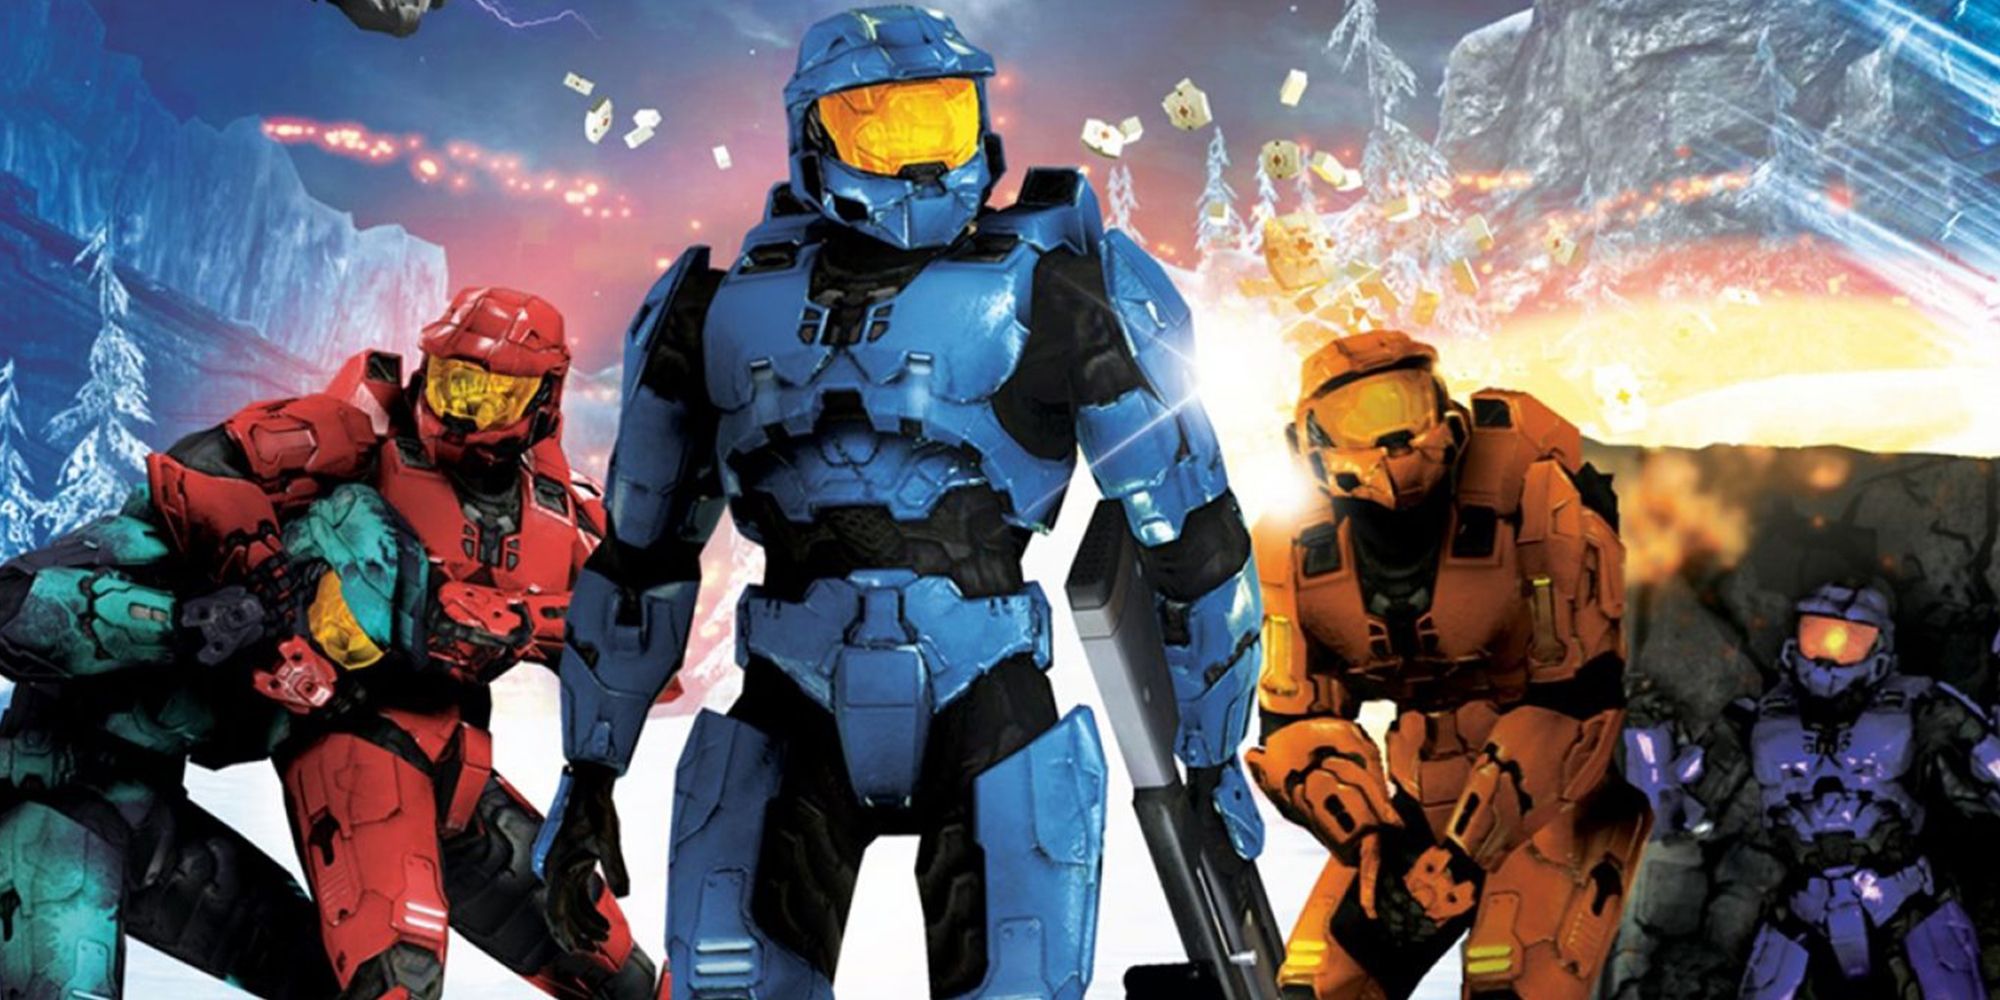 the cast of red vs blue halo machinima by rooster teeth